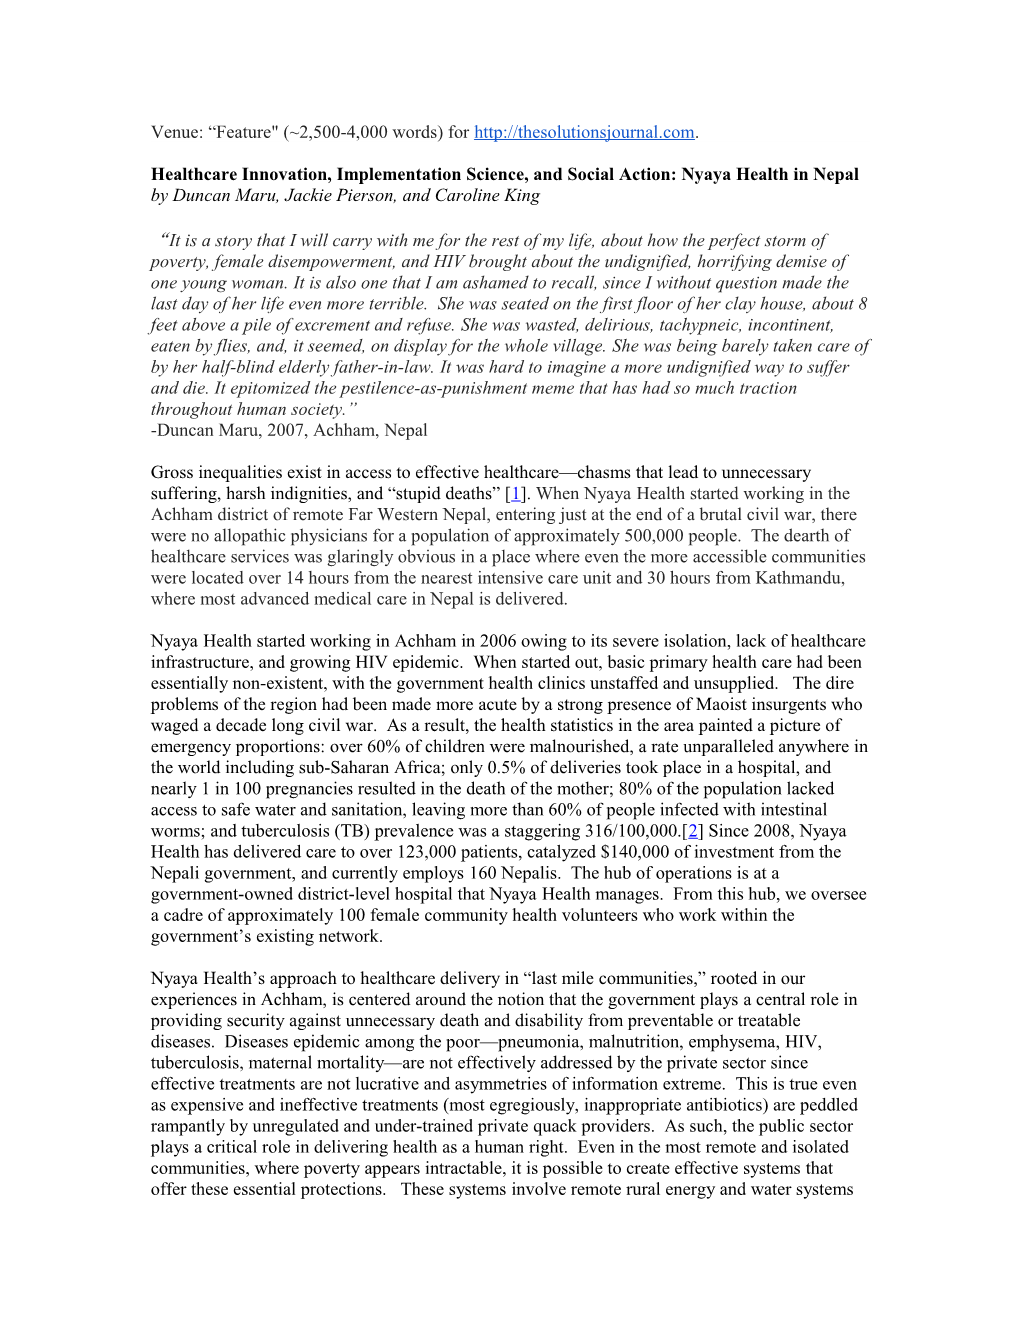 Healthcare Innovation, Implementation Science, and Social Action: Nyaya Health in Nepal